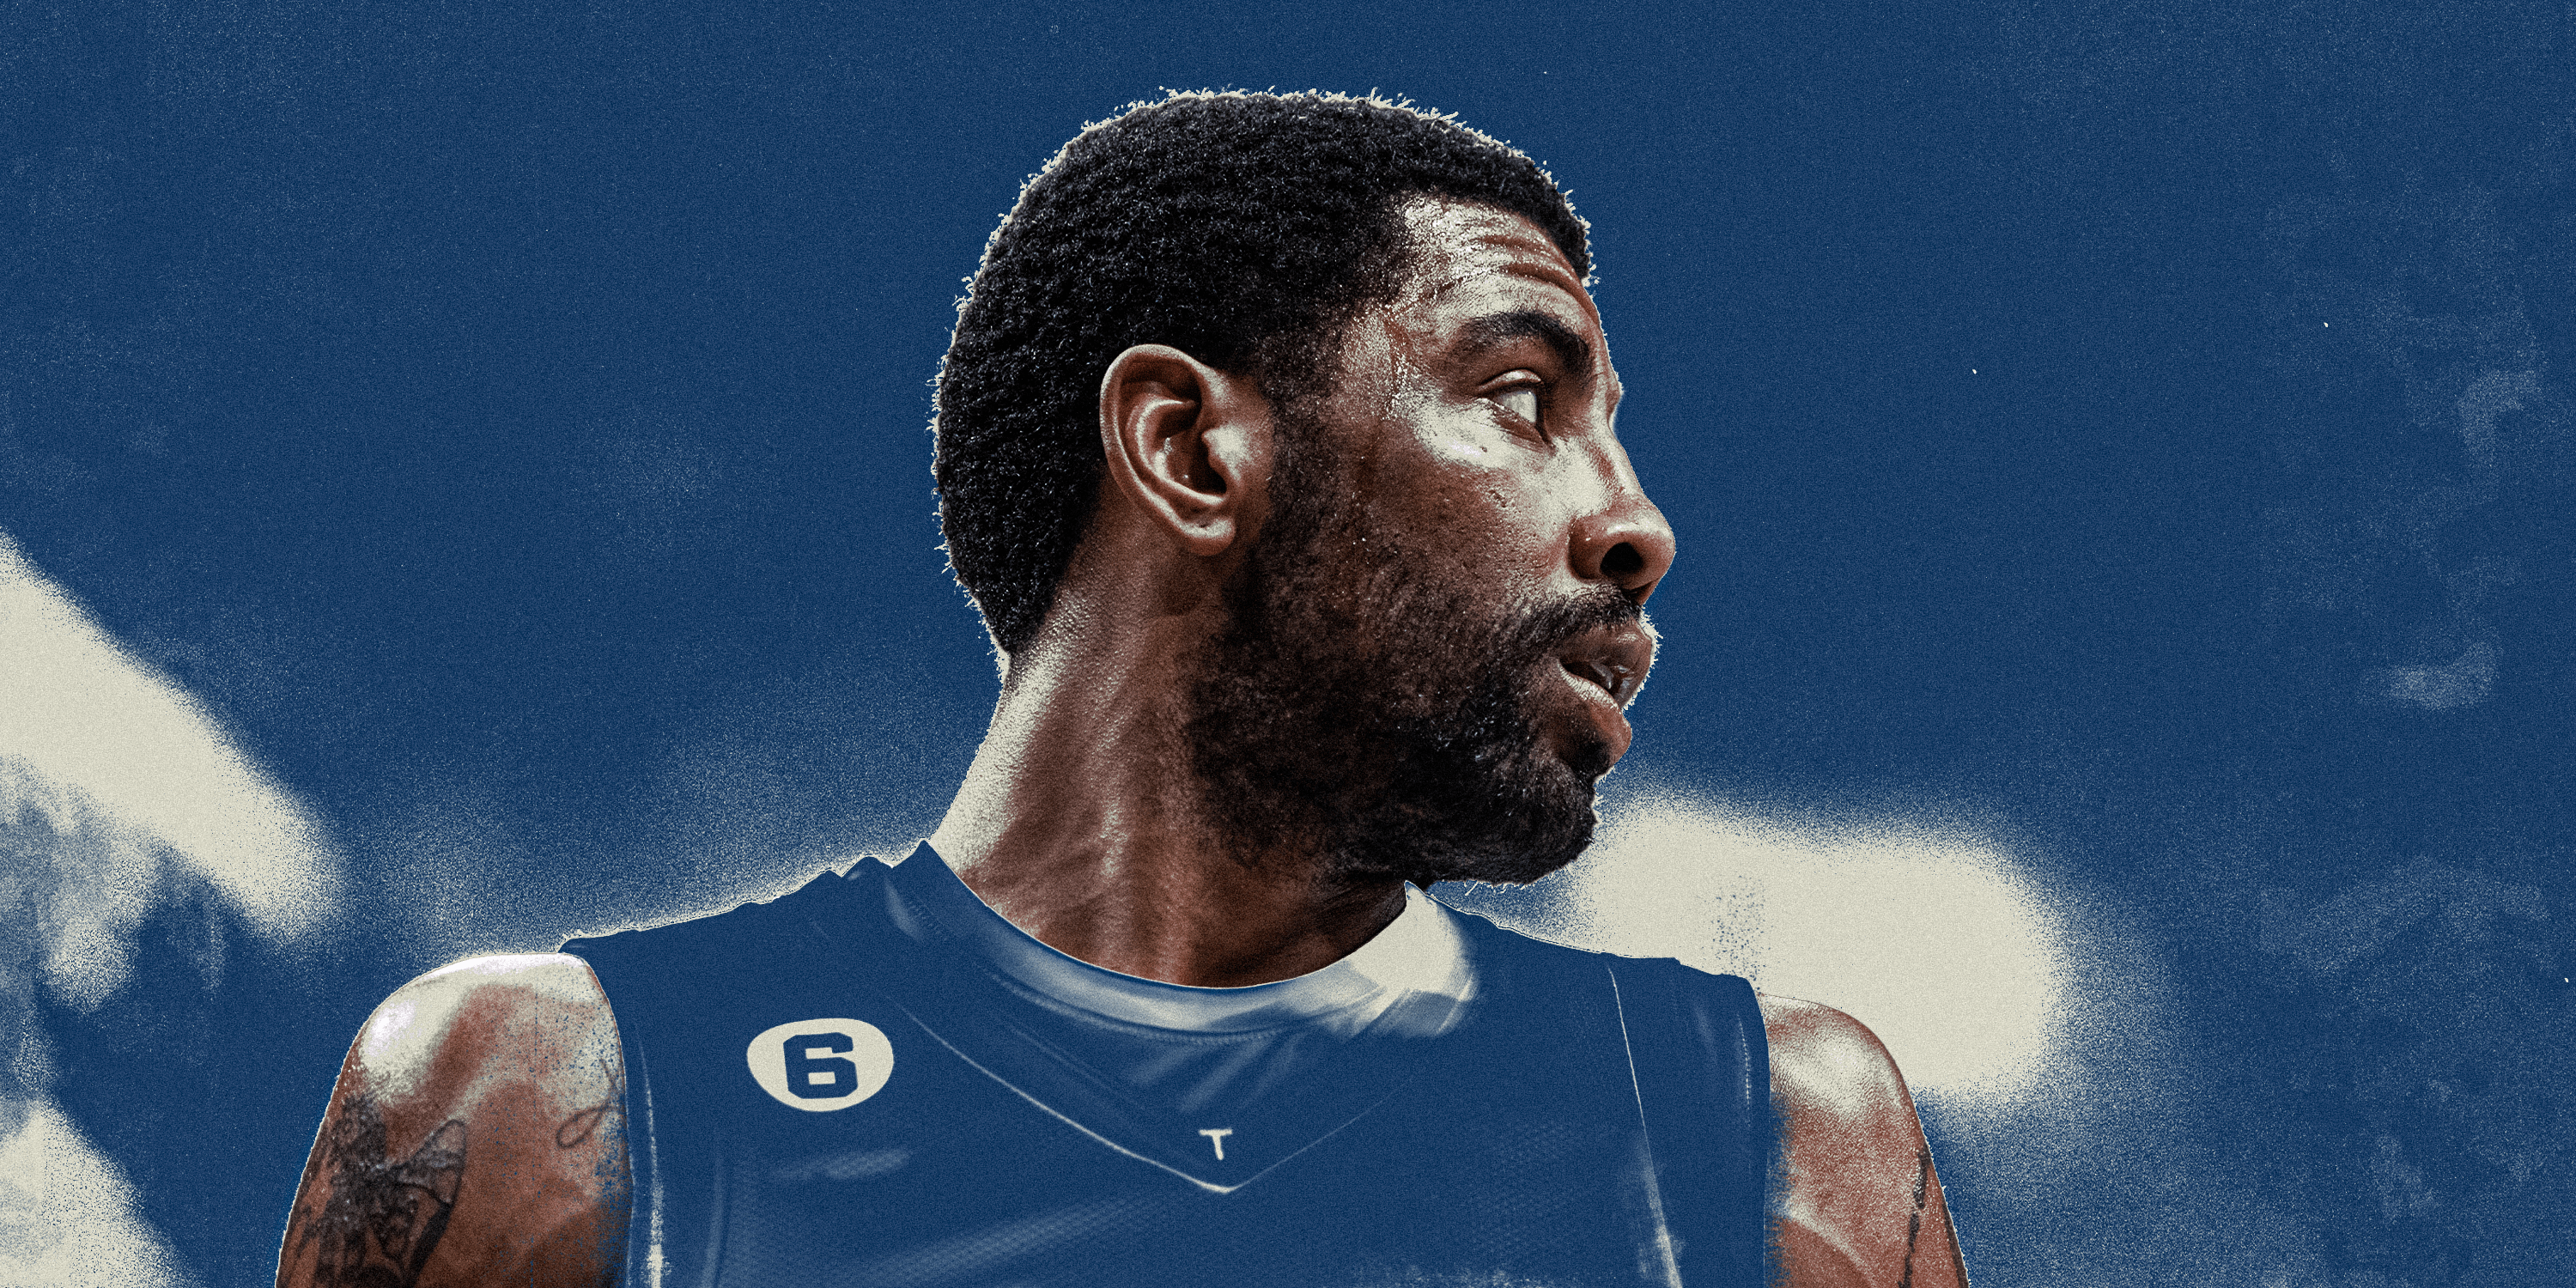 Sports Kyrie Irving HD Wallpaper